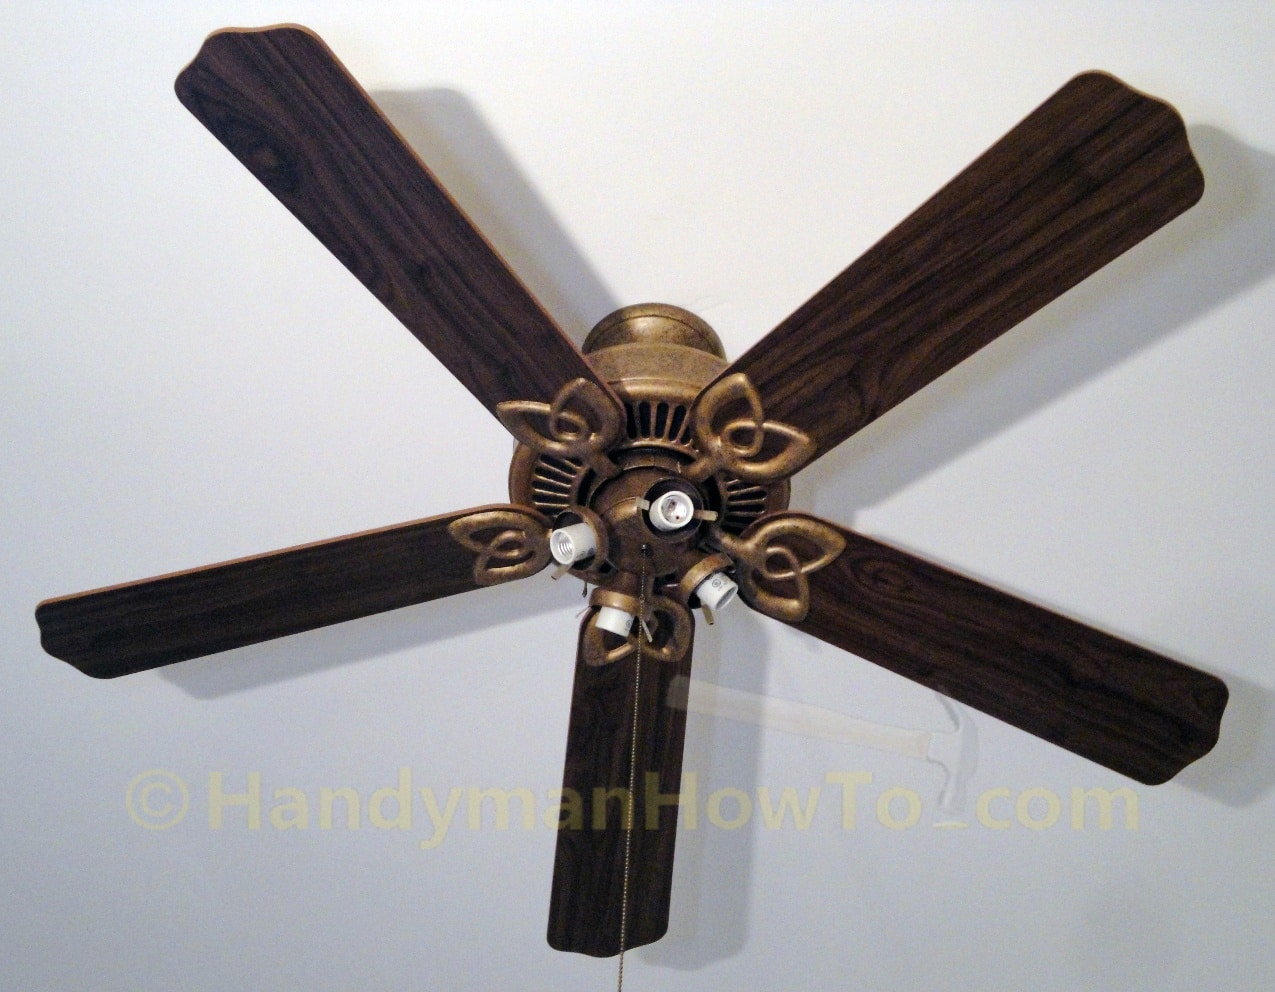 How To Replace A Ceiling Fan Motor Capacitor